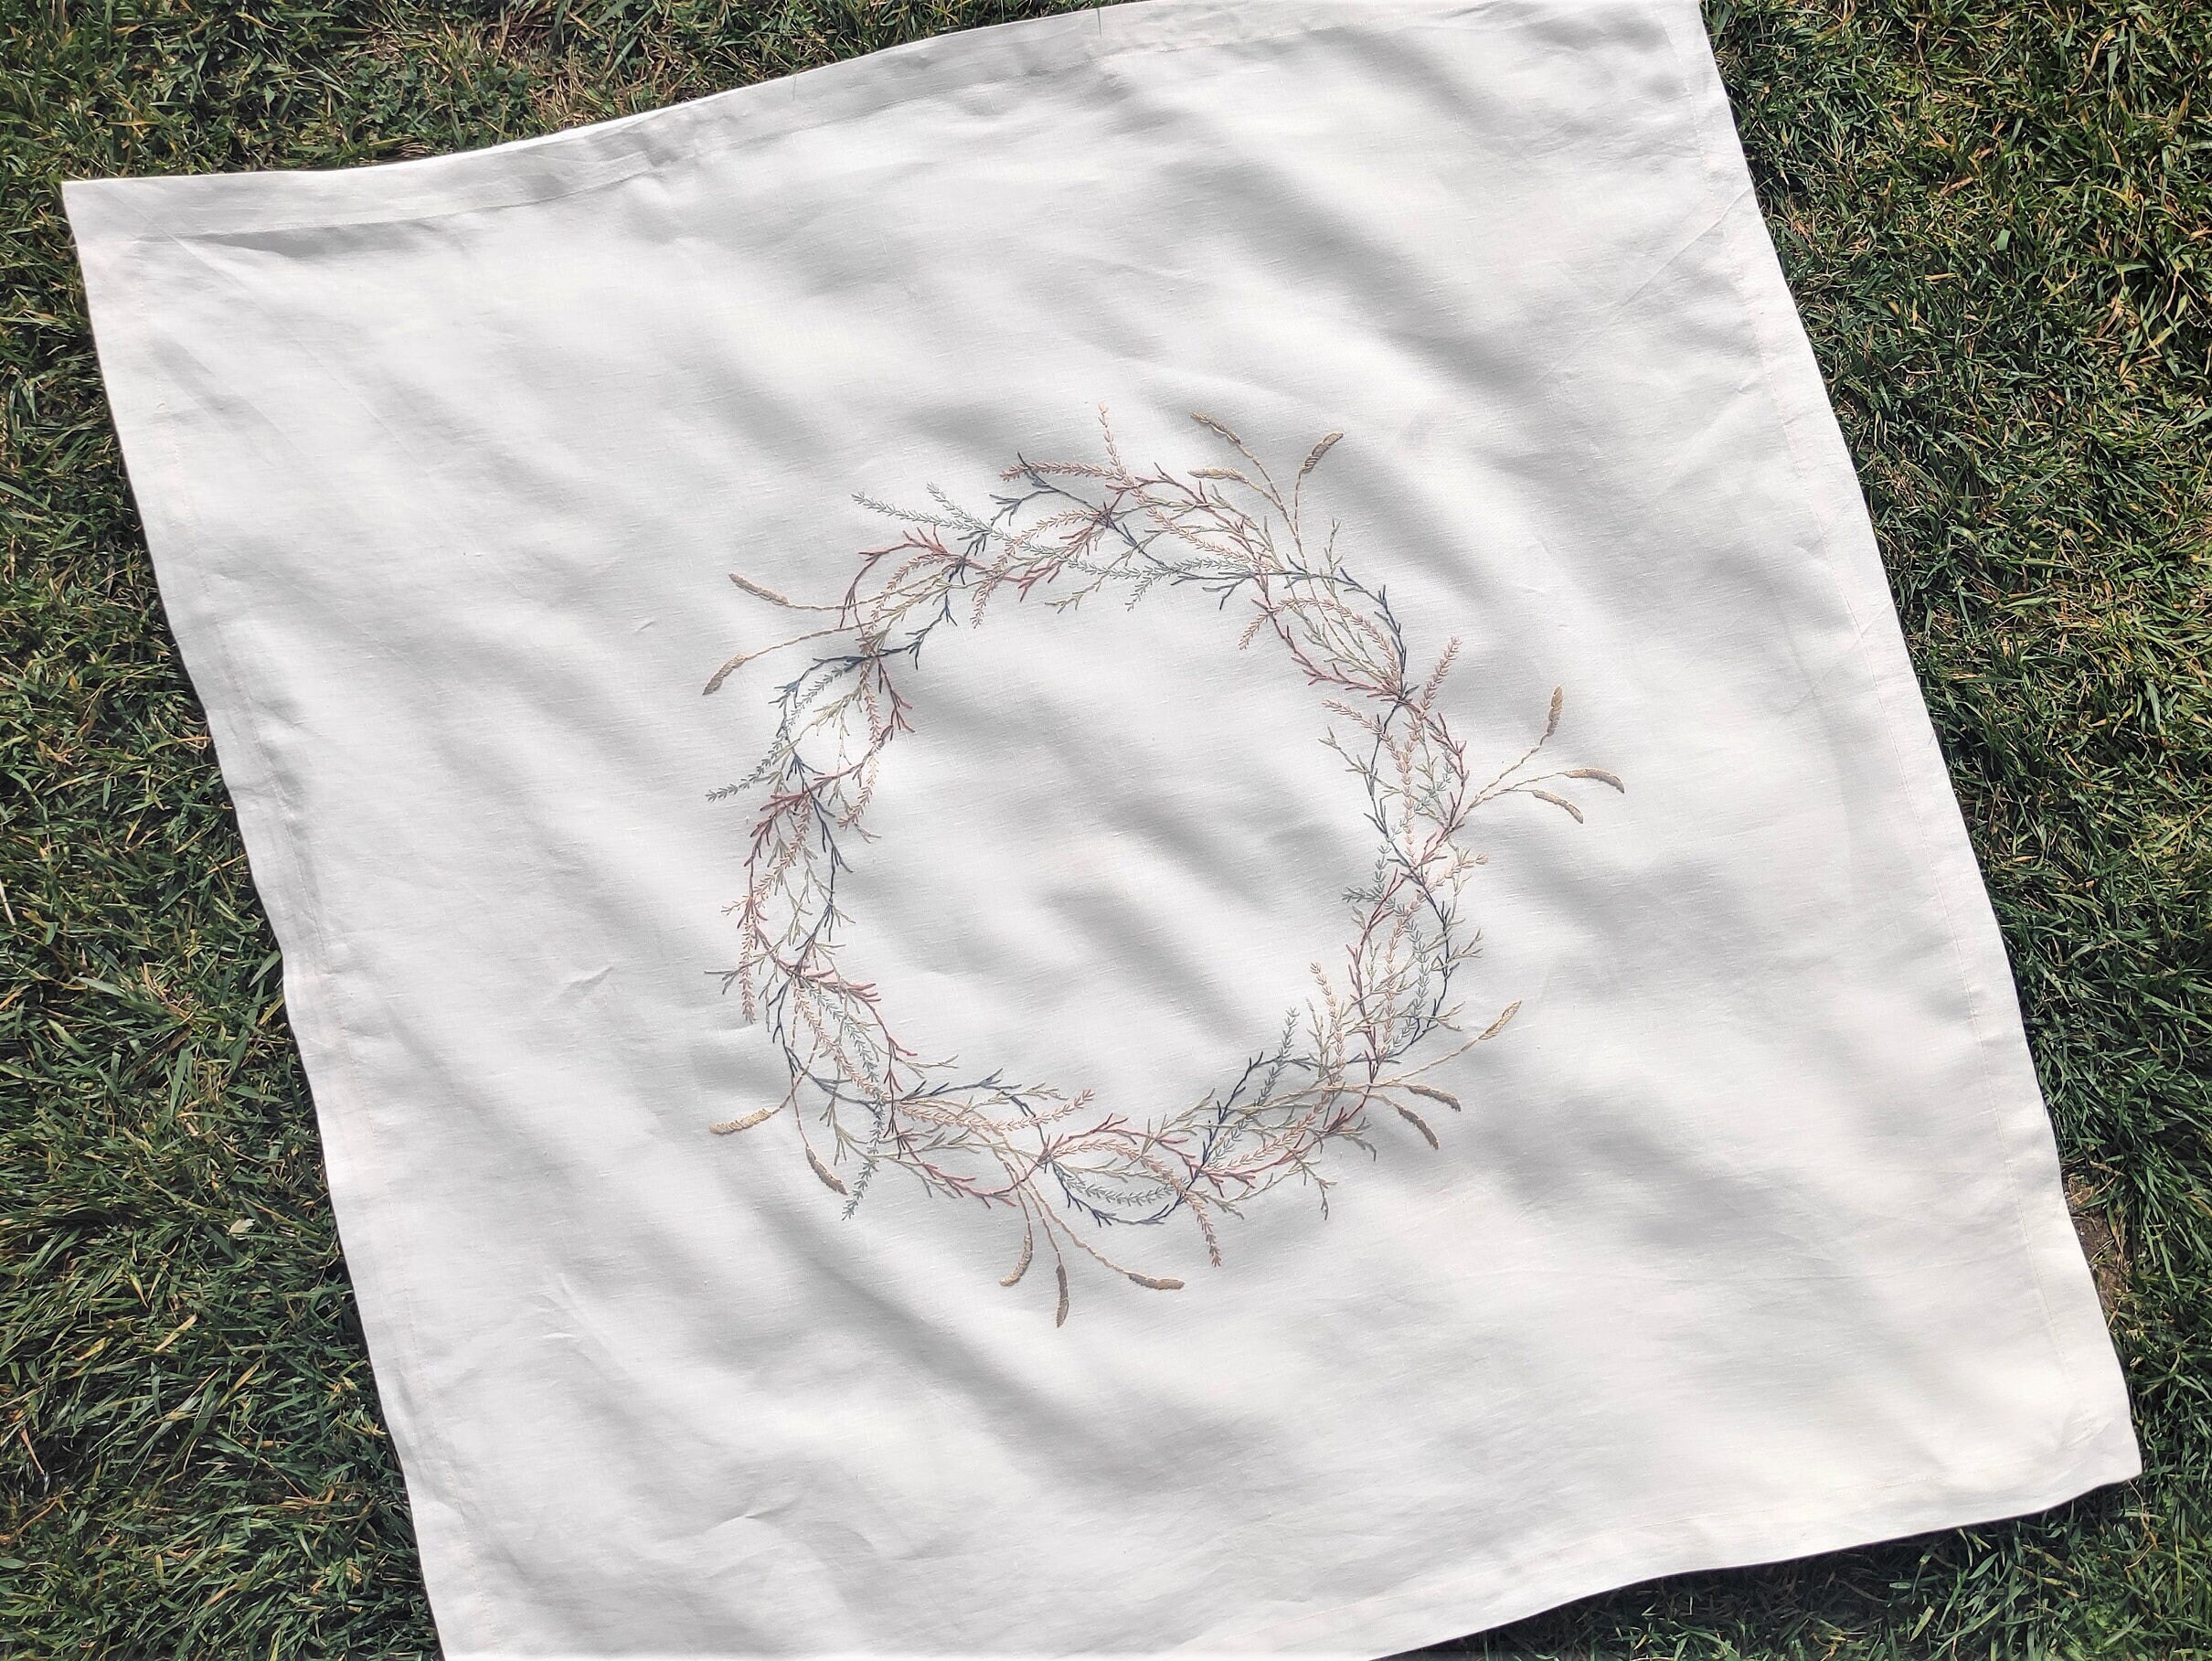 Transferring an Embroidery Pattern using Tracing Paper